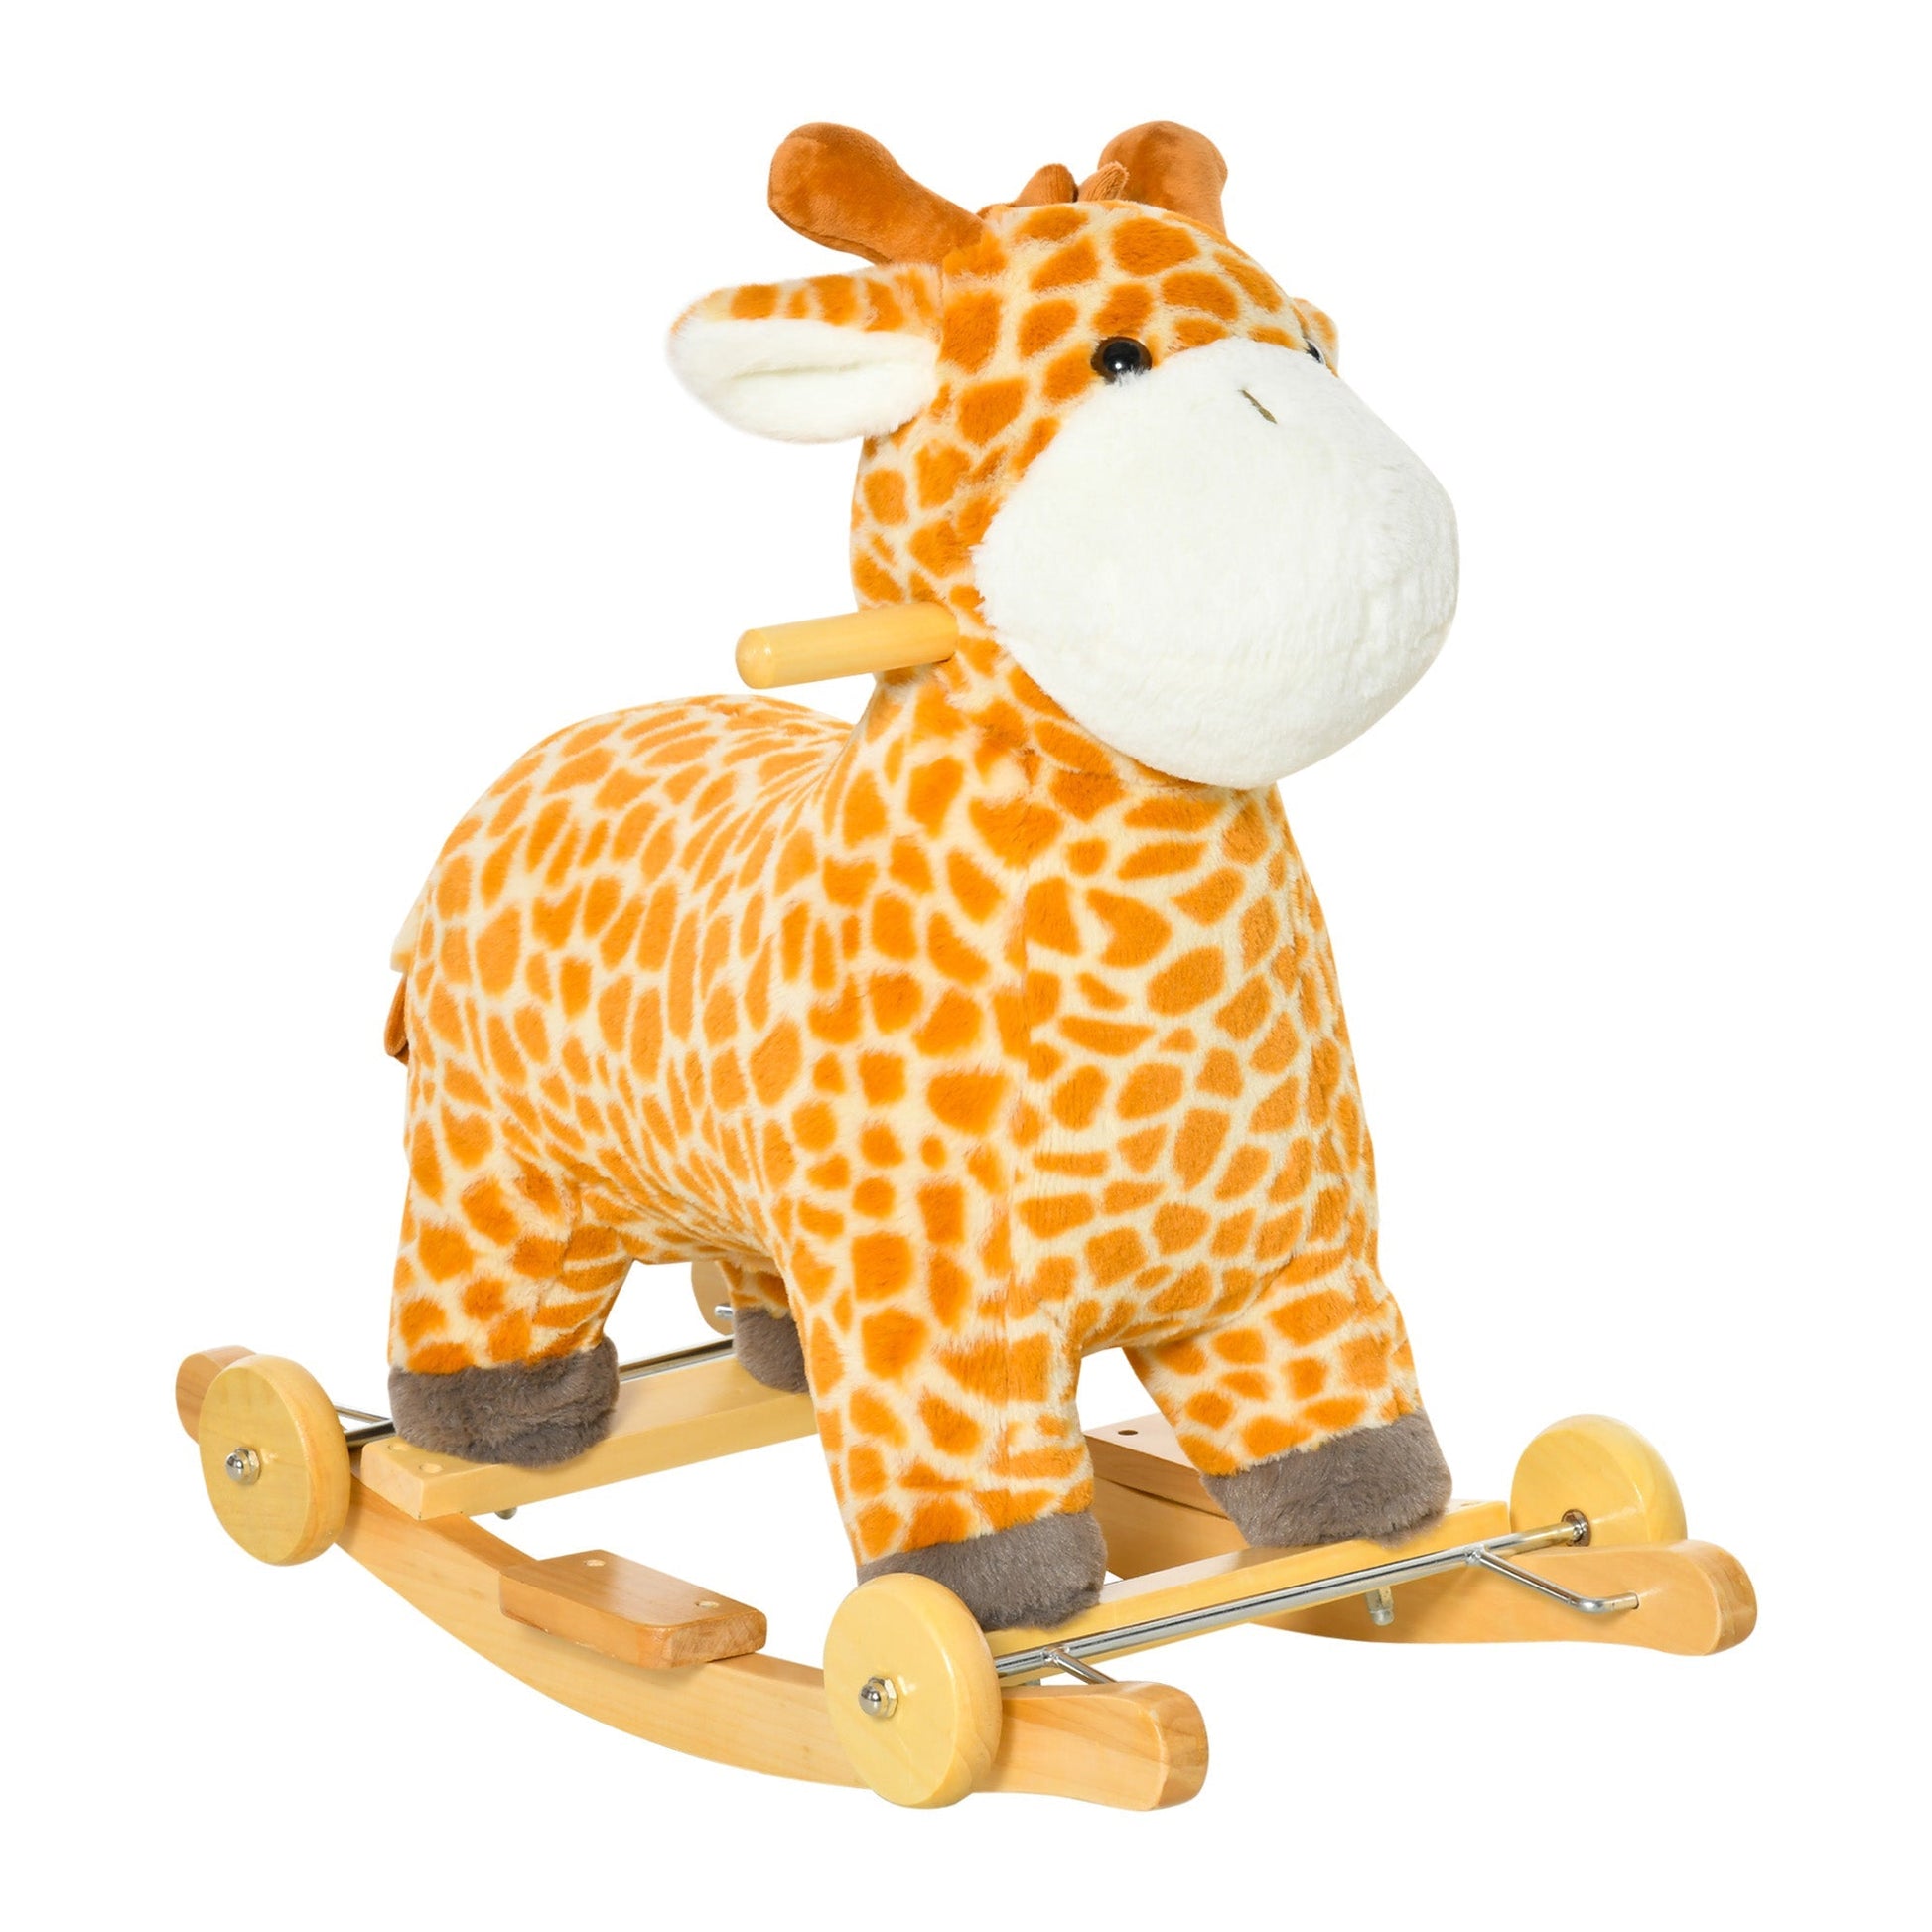 2-IN-1 Rocking Horse Kids Plush Ride-On Gliding Giraffe-shaped Plush Toy Rocker with Realistic Sounds for Child 36-72 Months Yellow at Gallery Canada